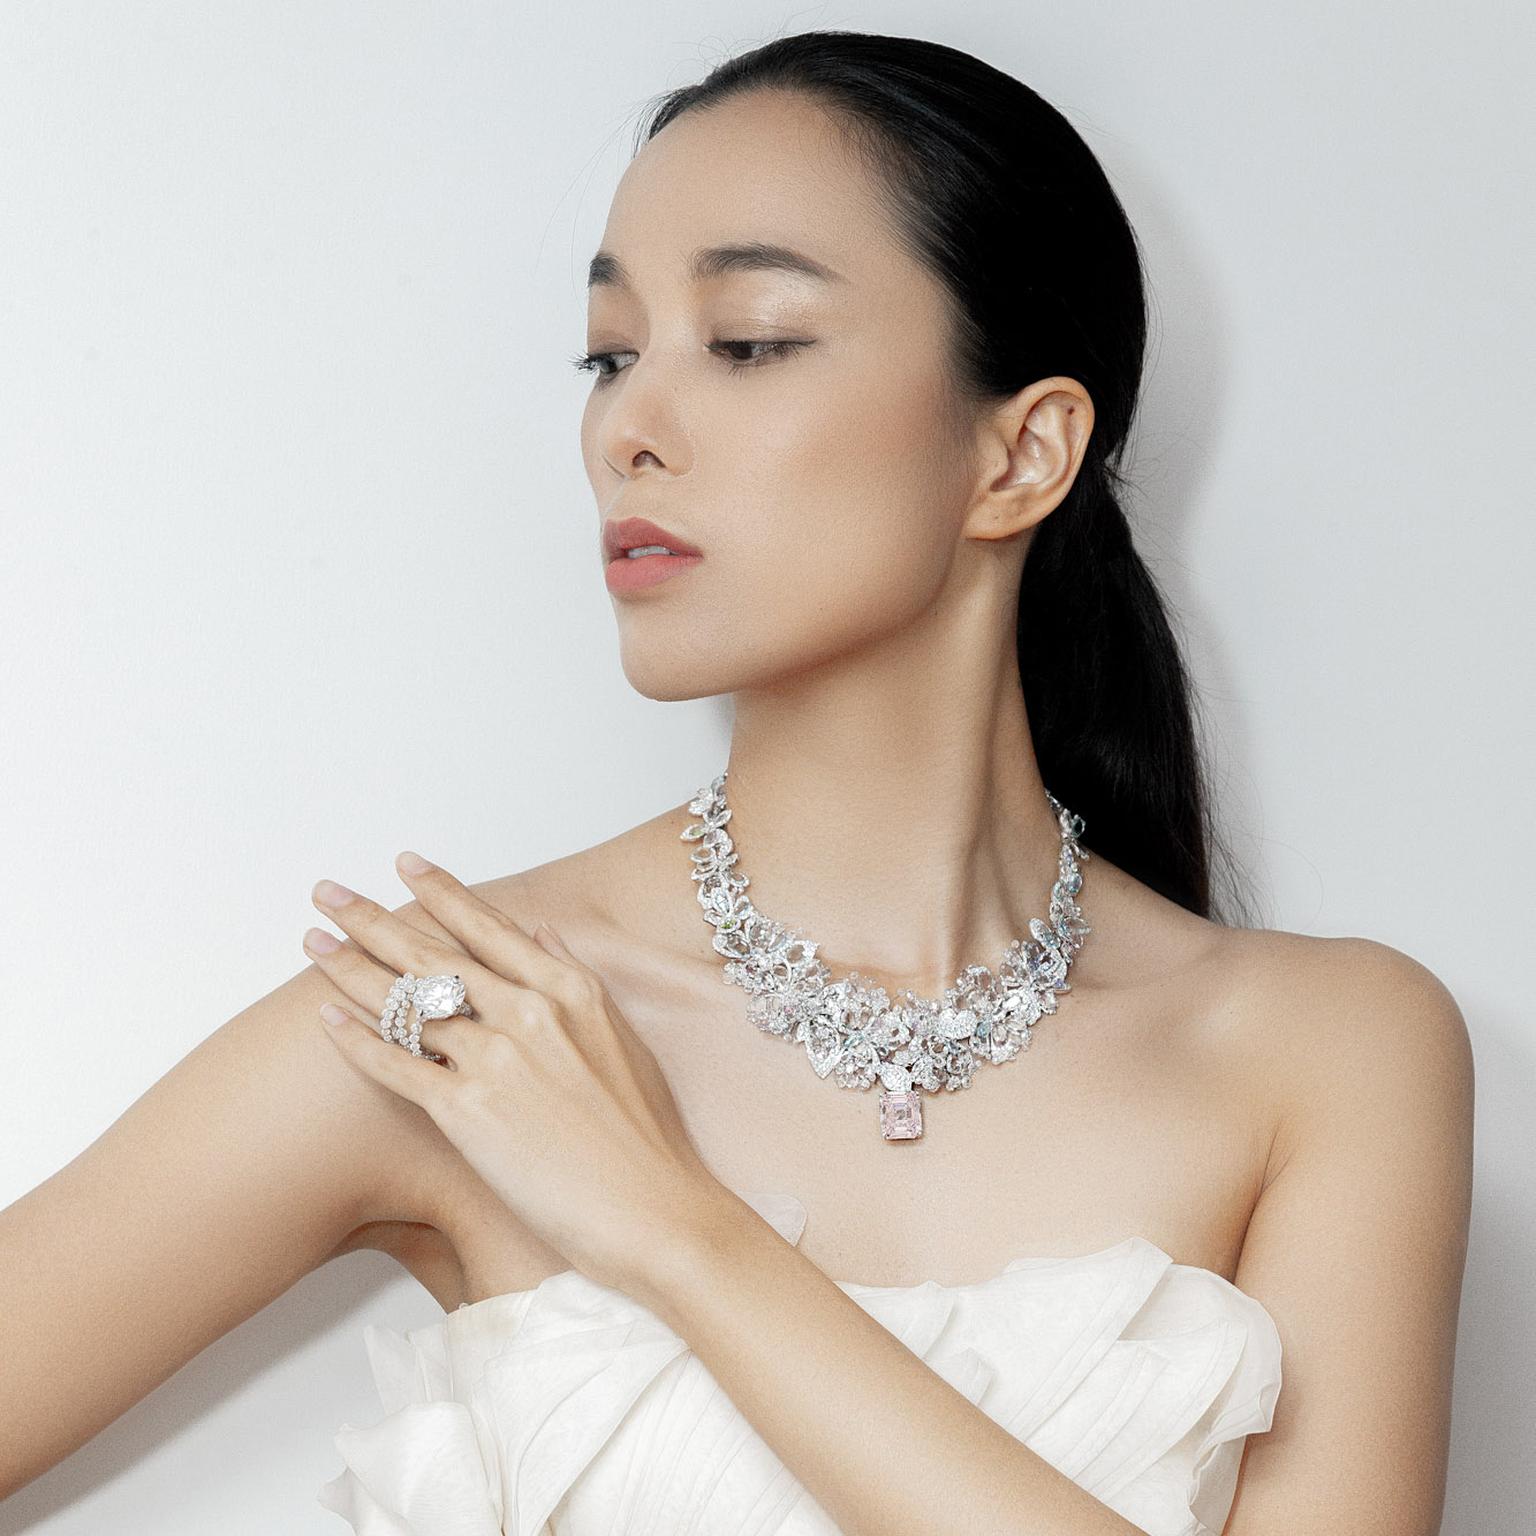 Fountain of diamonds ring (Lot 648) and Les Jardins de Giverny necklace (Lot 649) by Feng J